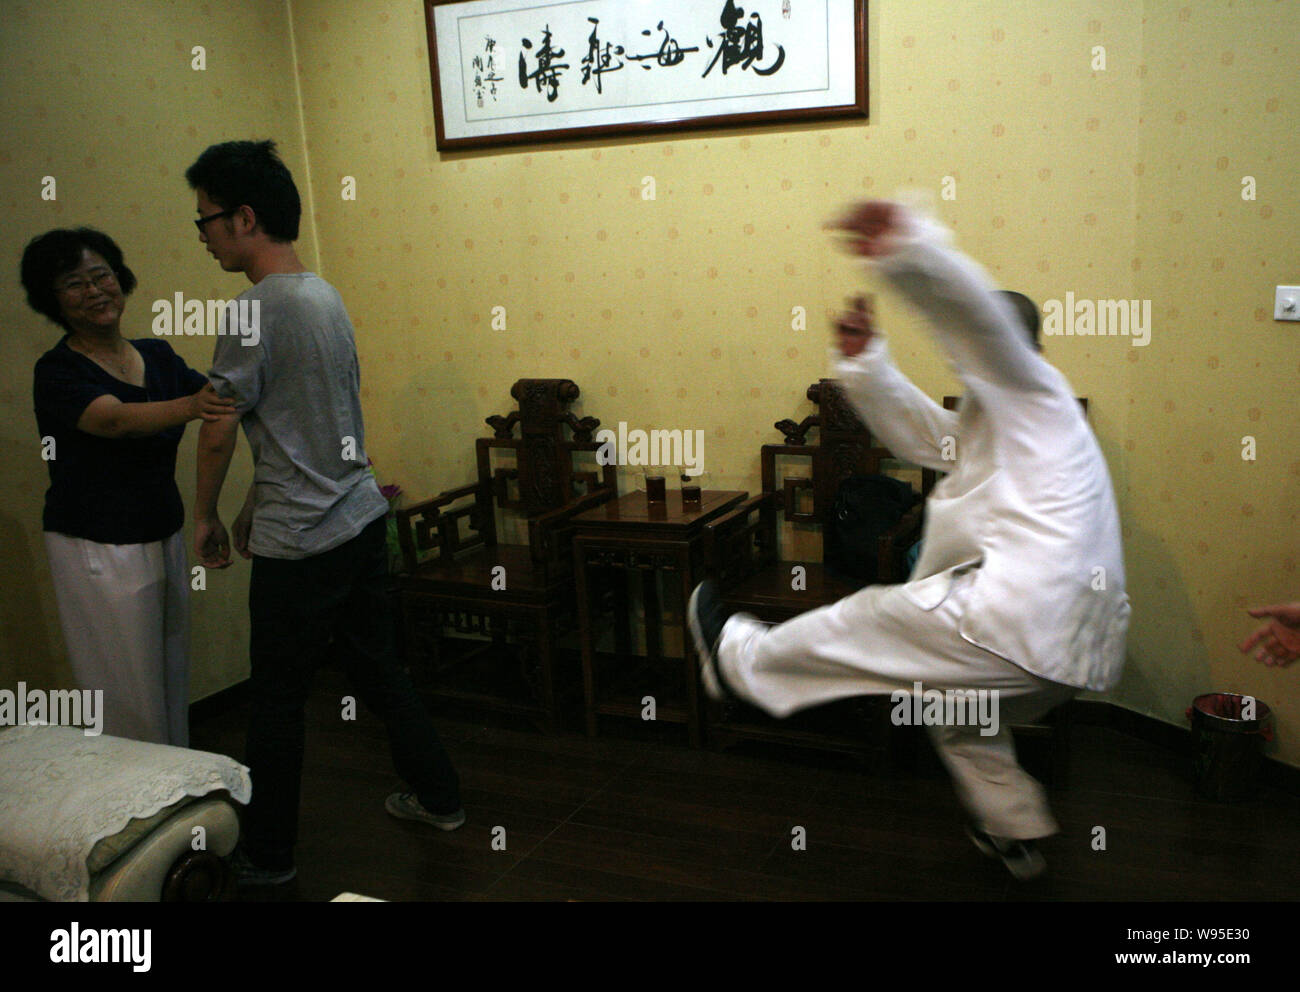 Chinese Tai Chi master Yan Fang (L) demonstrates Pushing Hands, a traditional Tai Chi techinque, in which the challengers are knocked back for a coupl Stock Photo